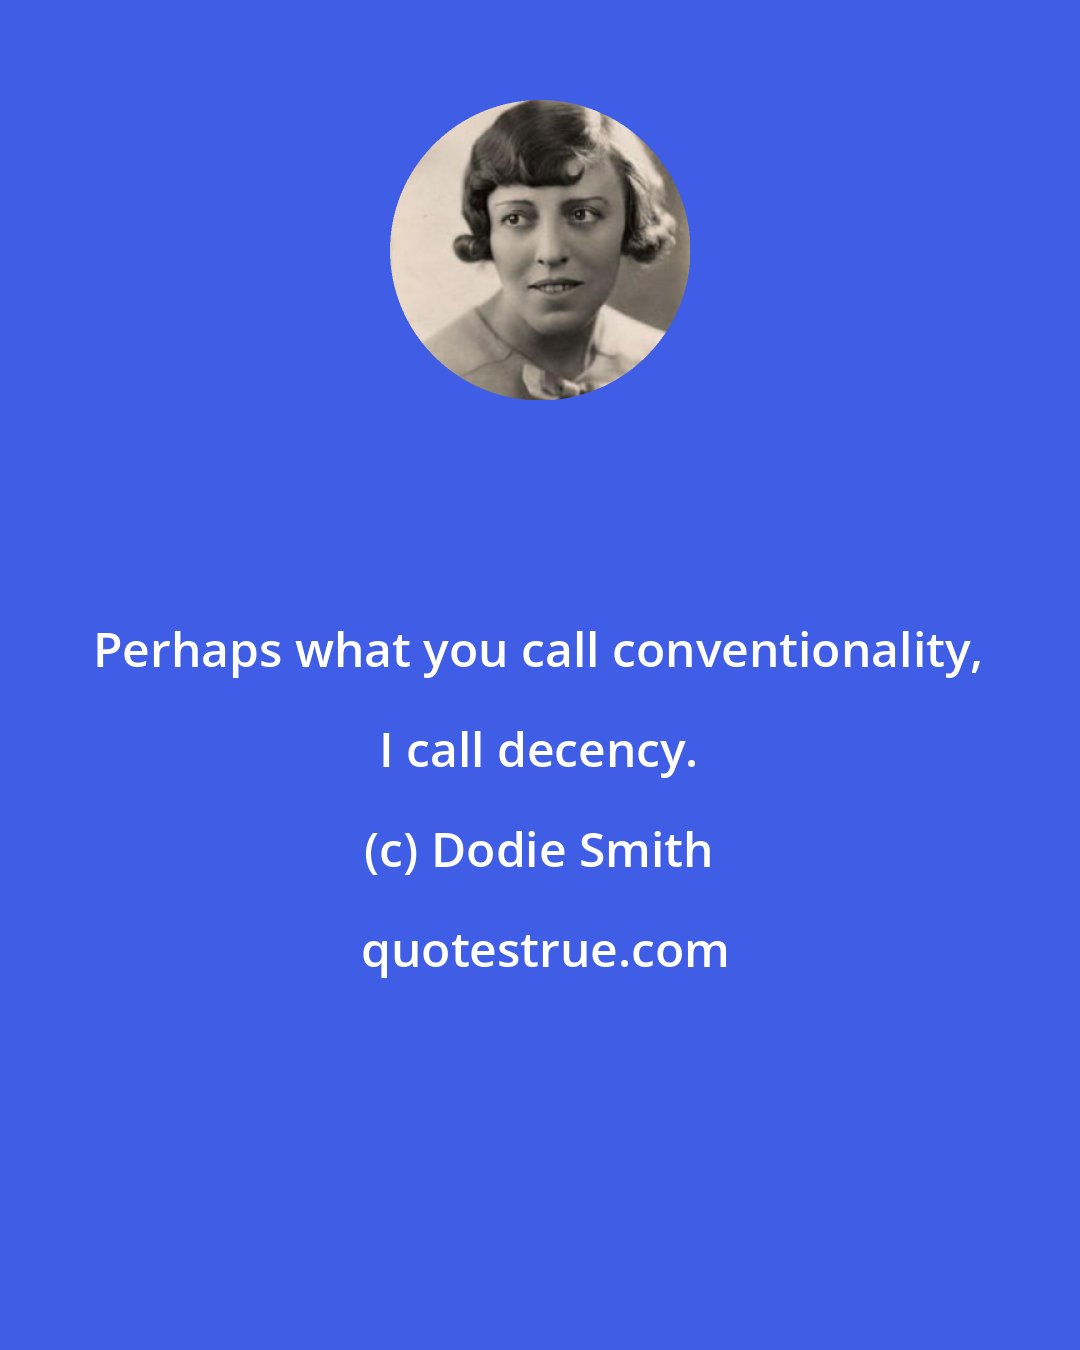 Dodie Smith: Perhaps what you call conventionality, I call decency.